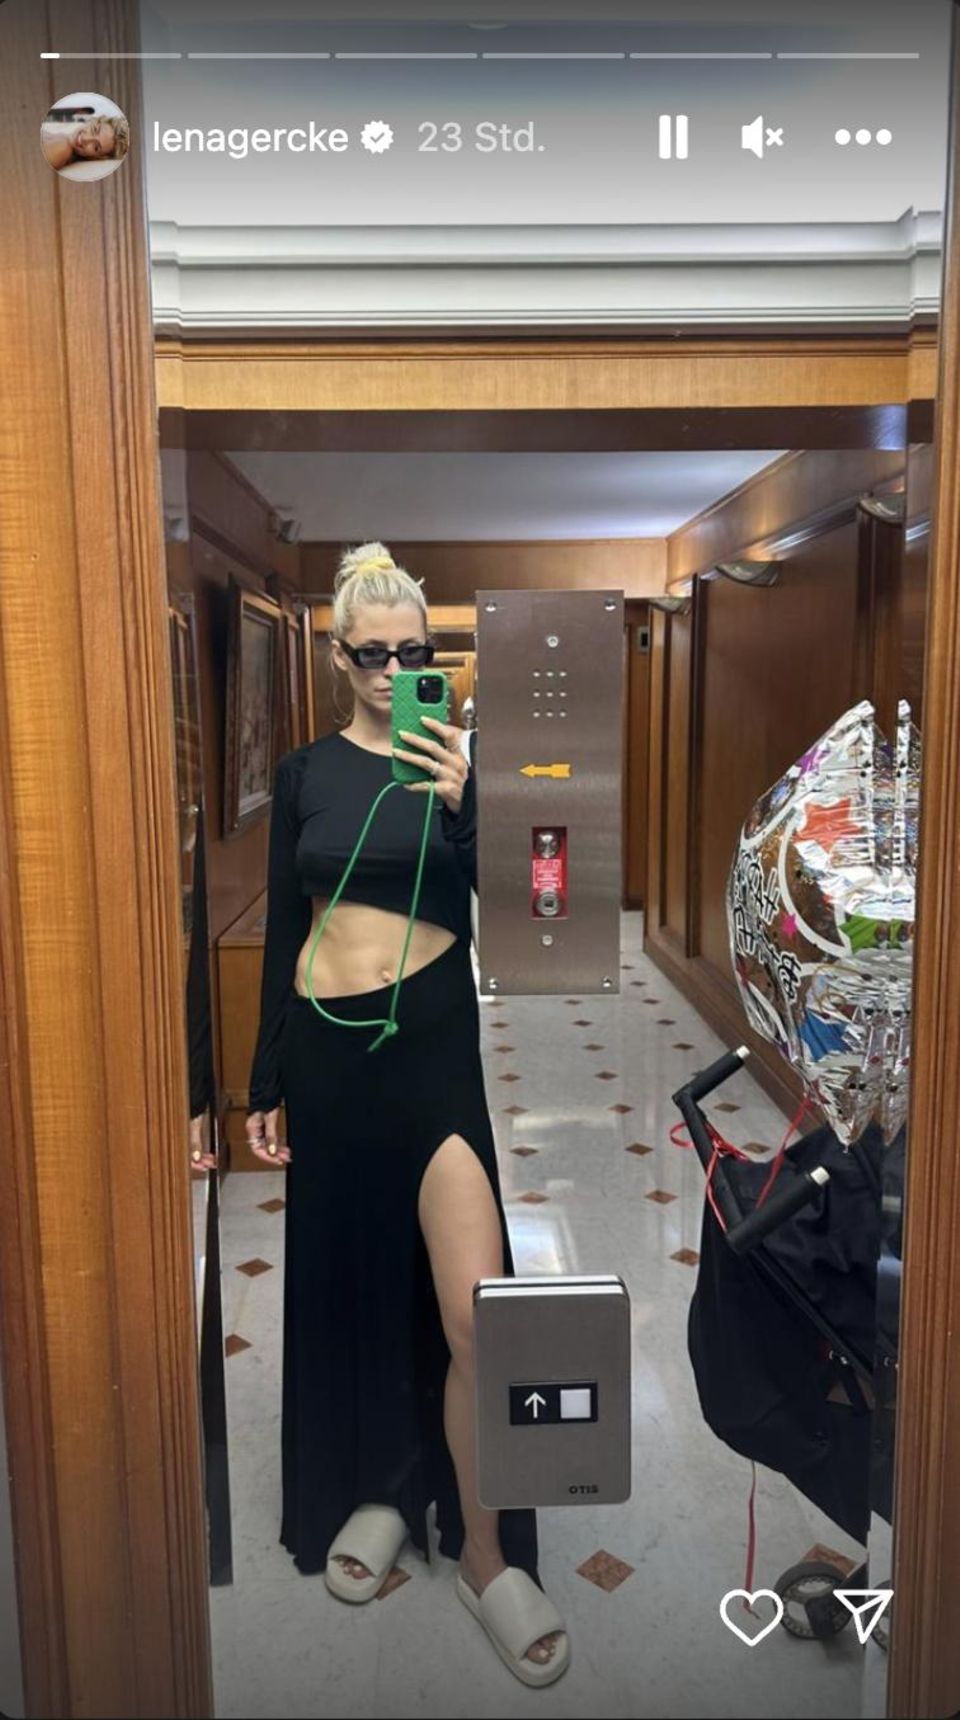 Snapshot from the elevator: Here Lena Gercke shows the complete outfit.